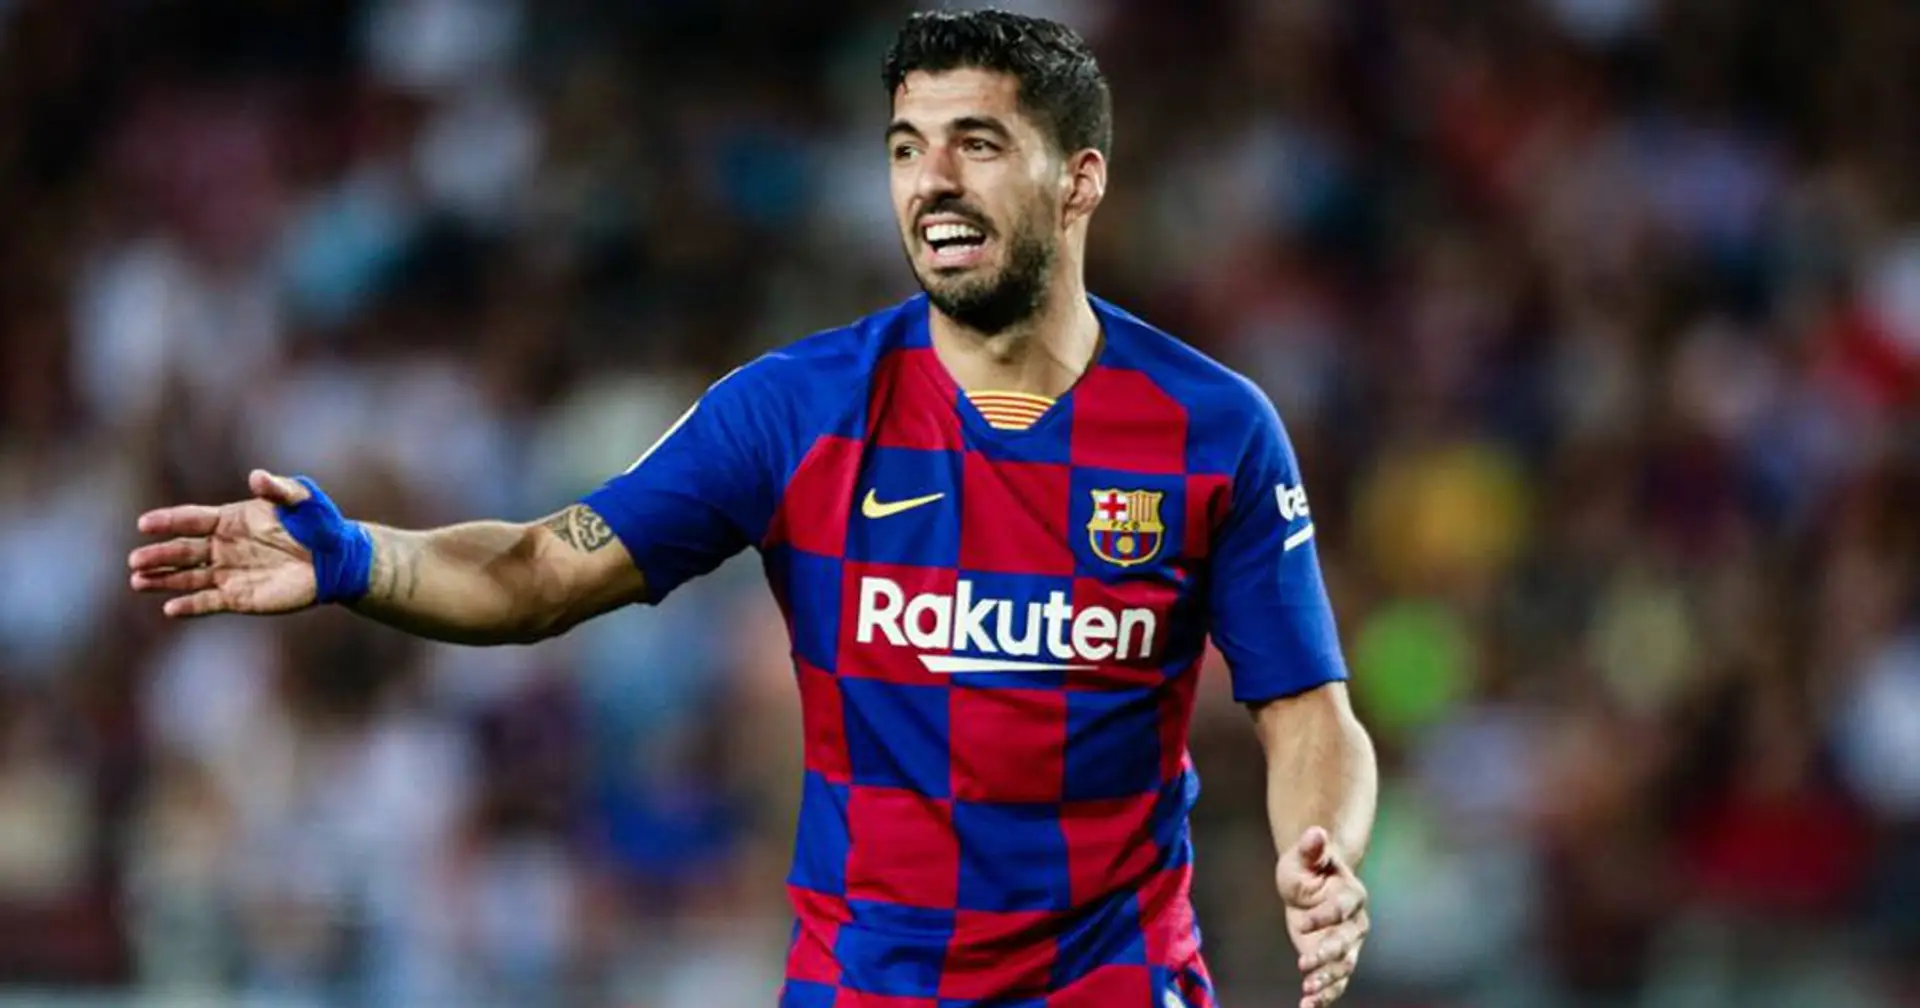 TUESDAY TACTICS: Should Quique Setien include Luis Suarez in starting XI immediately?